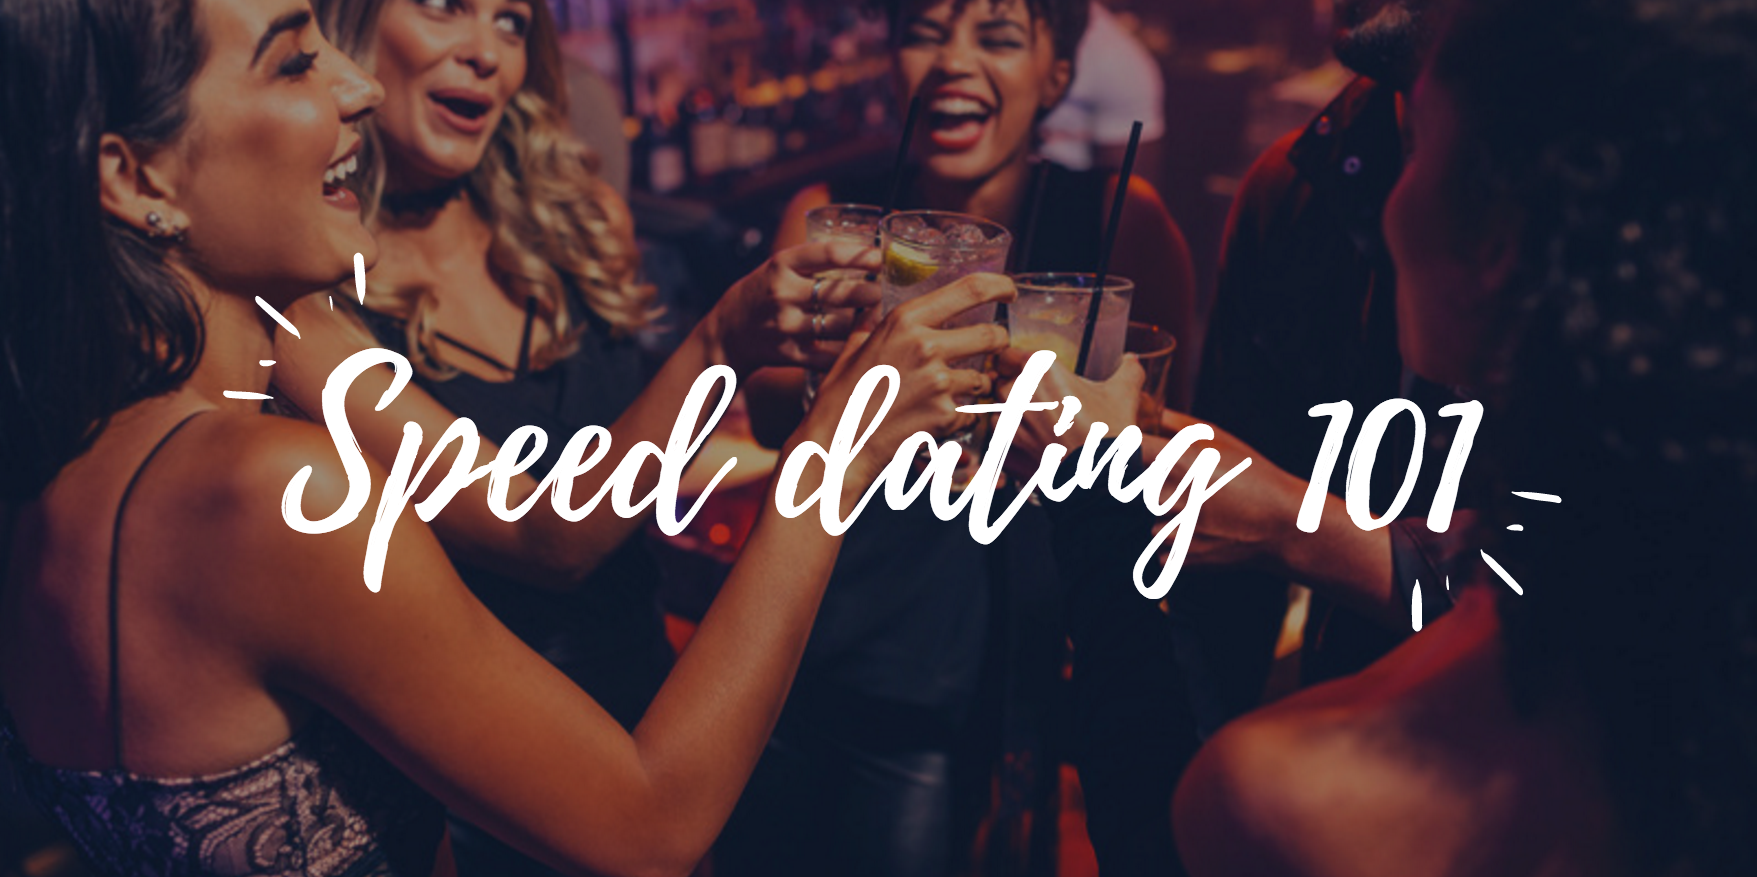 Speed dating sites